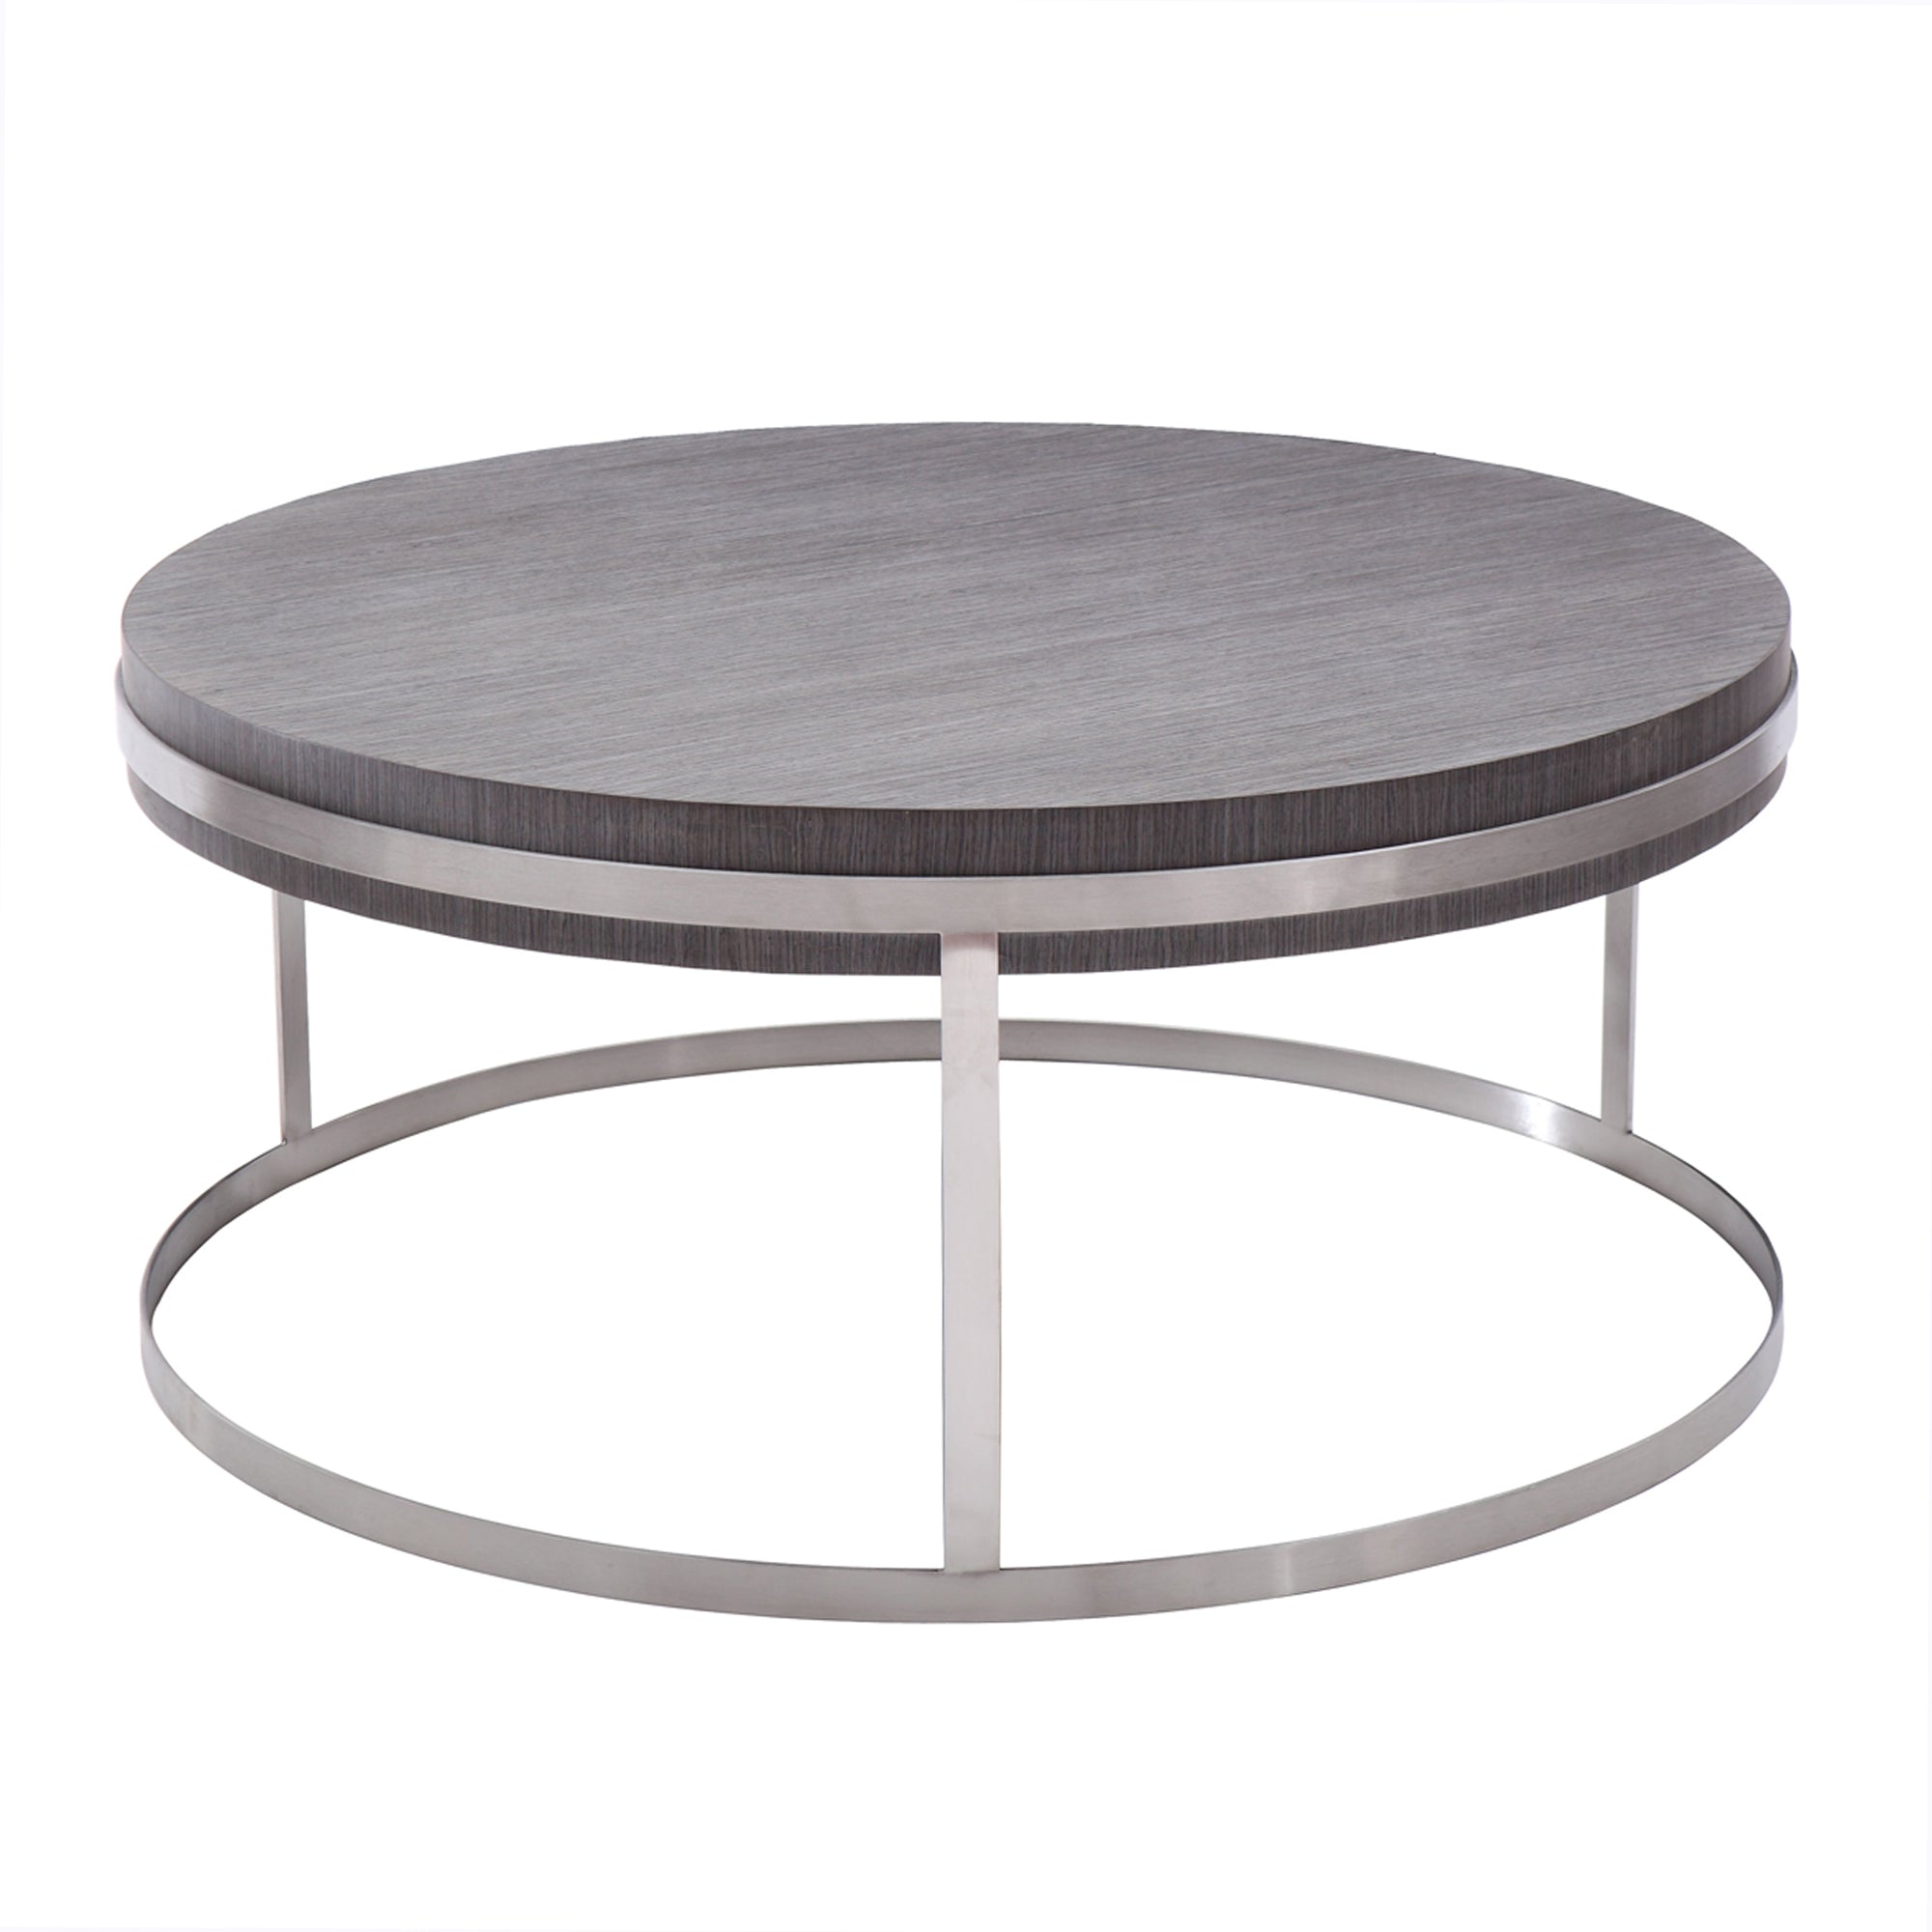 Armen Living Lcsucogr Sunset Coffee Table In Brushed Stainless Steel Finish With Grey Top